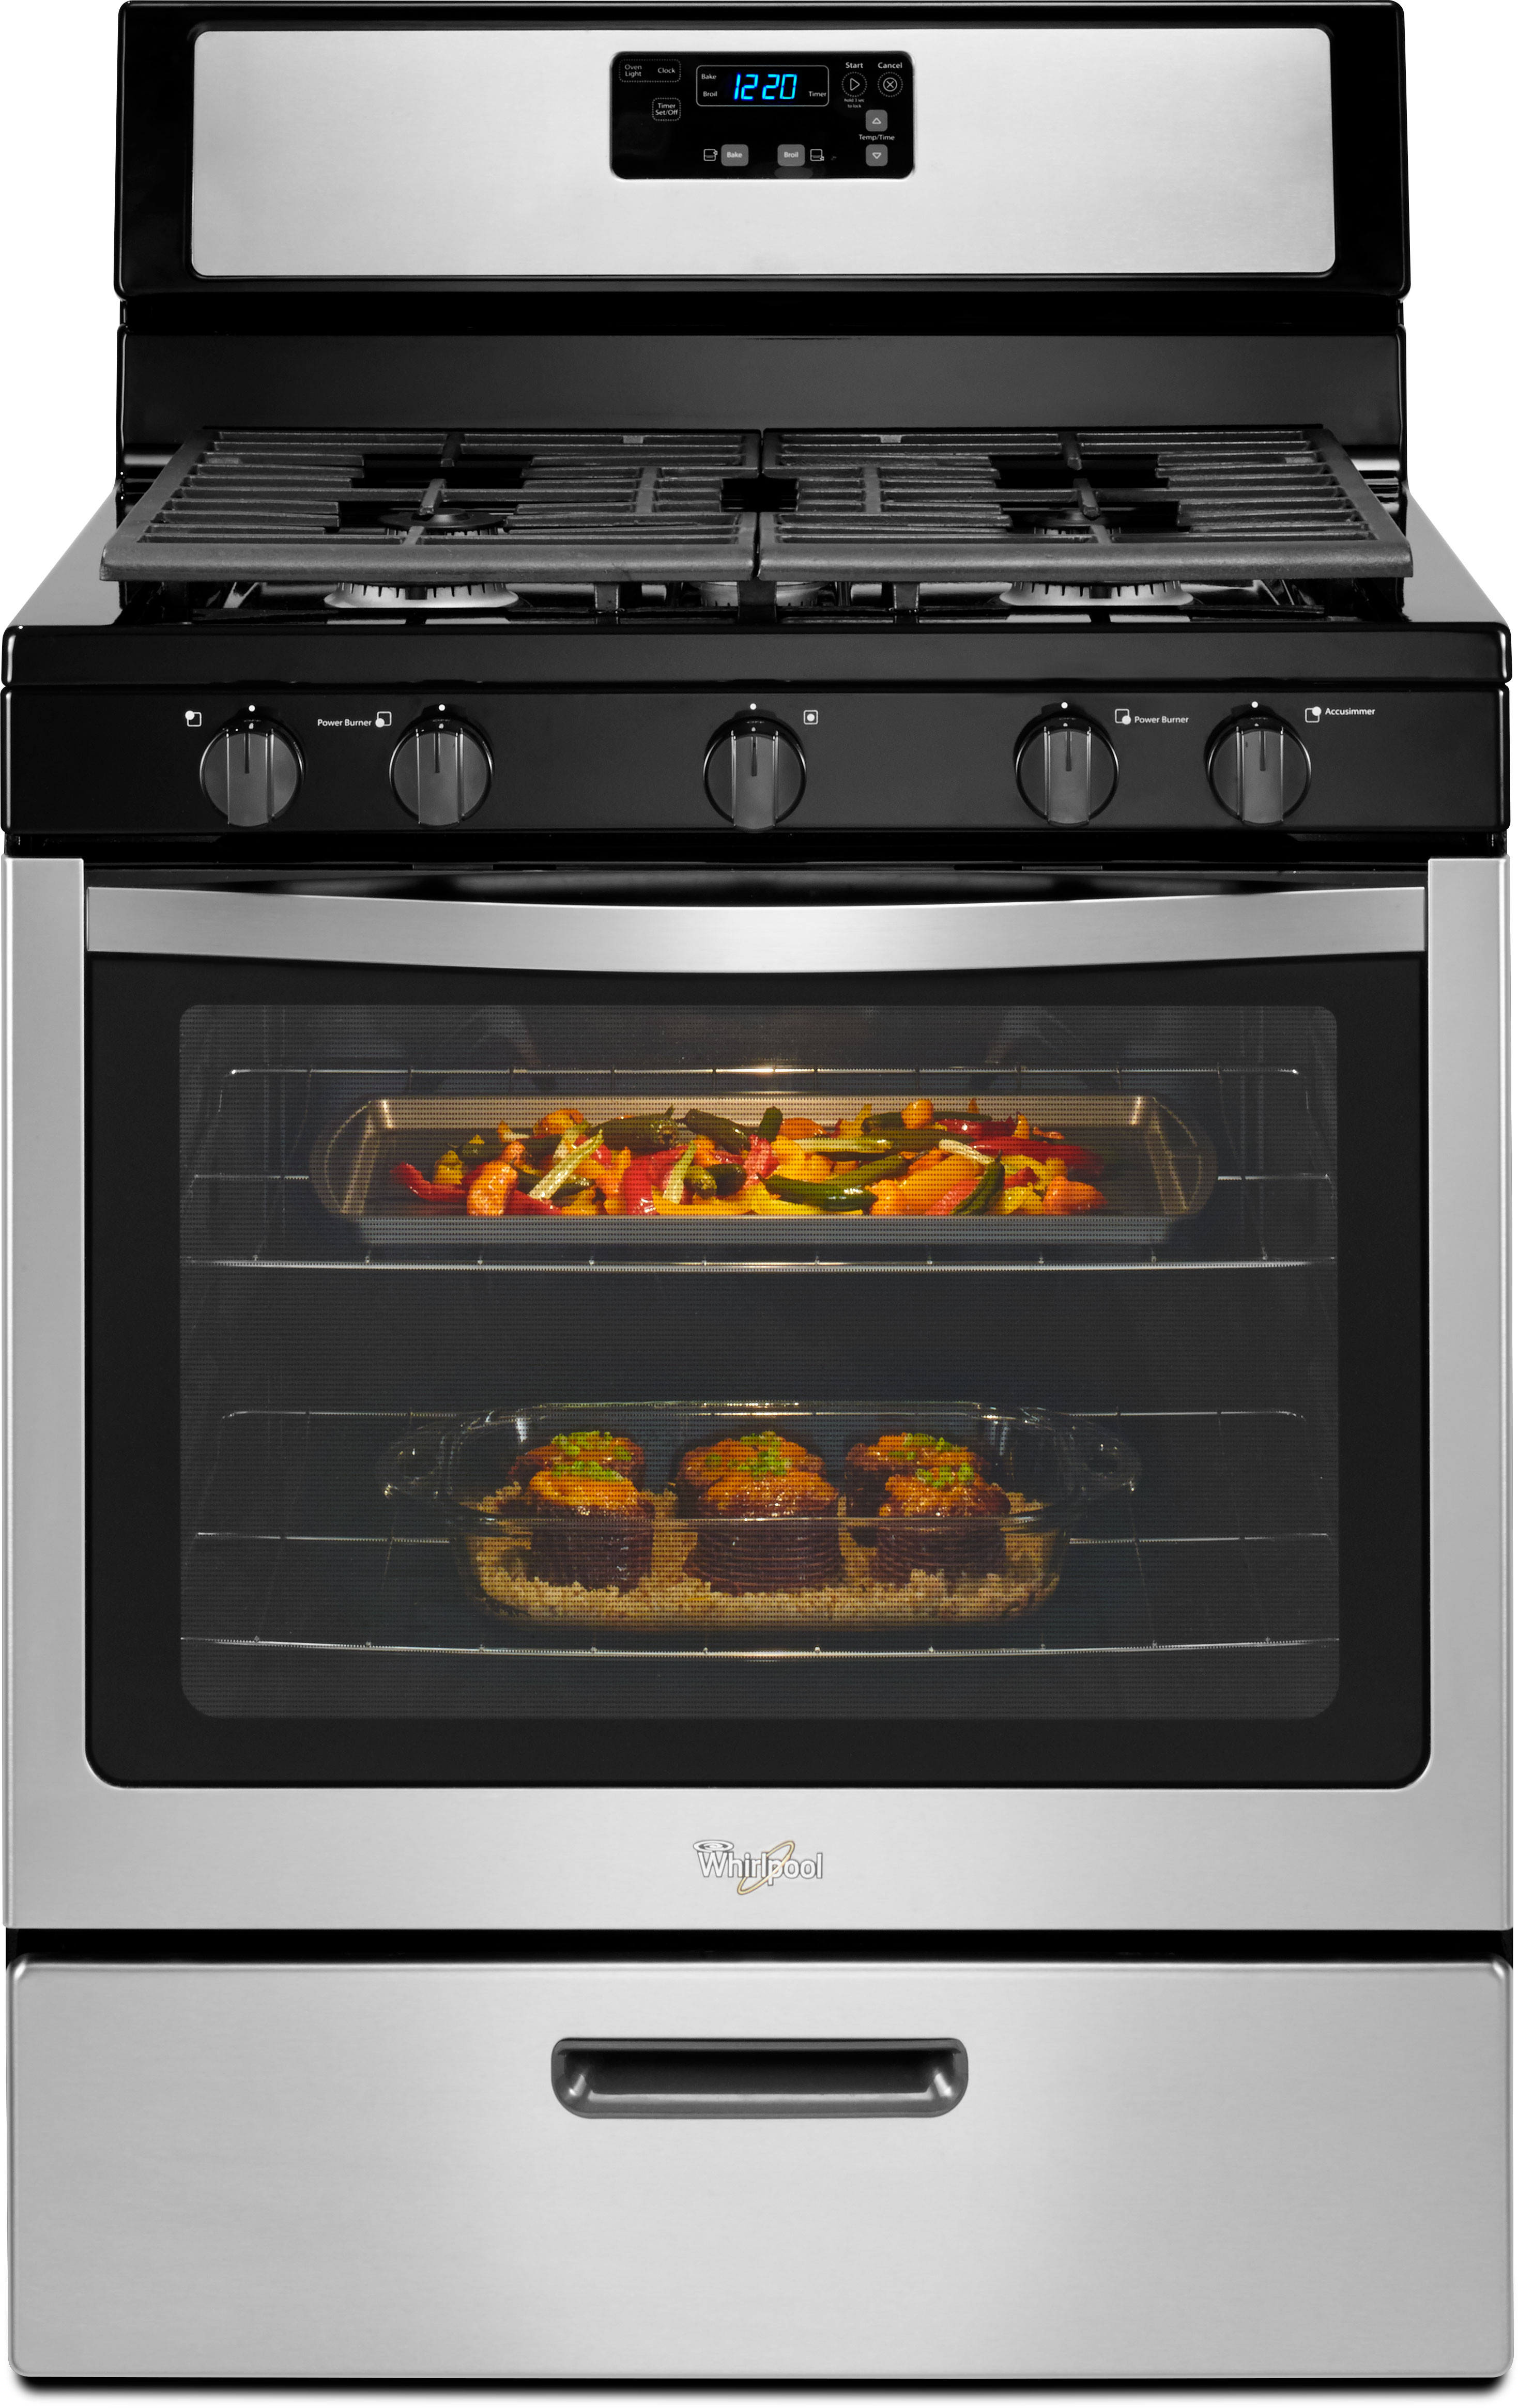 whirlpool-wfg505m0bs-30-inch-freestanding-gas-range-with-5-sealed